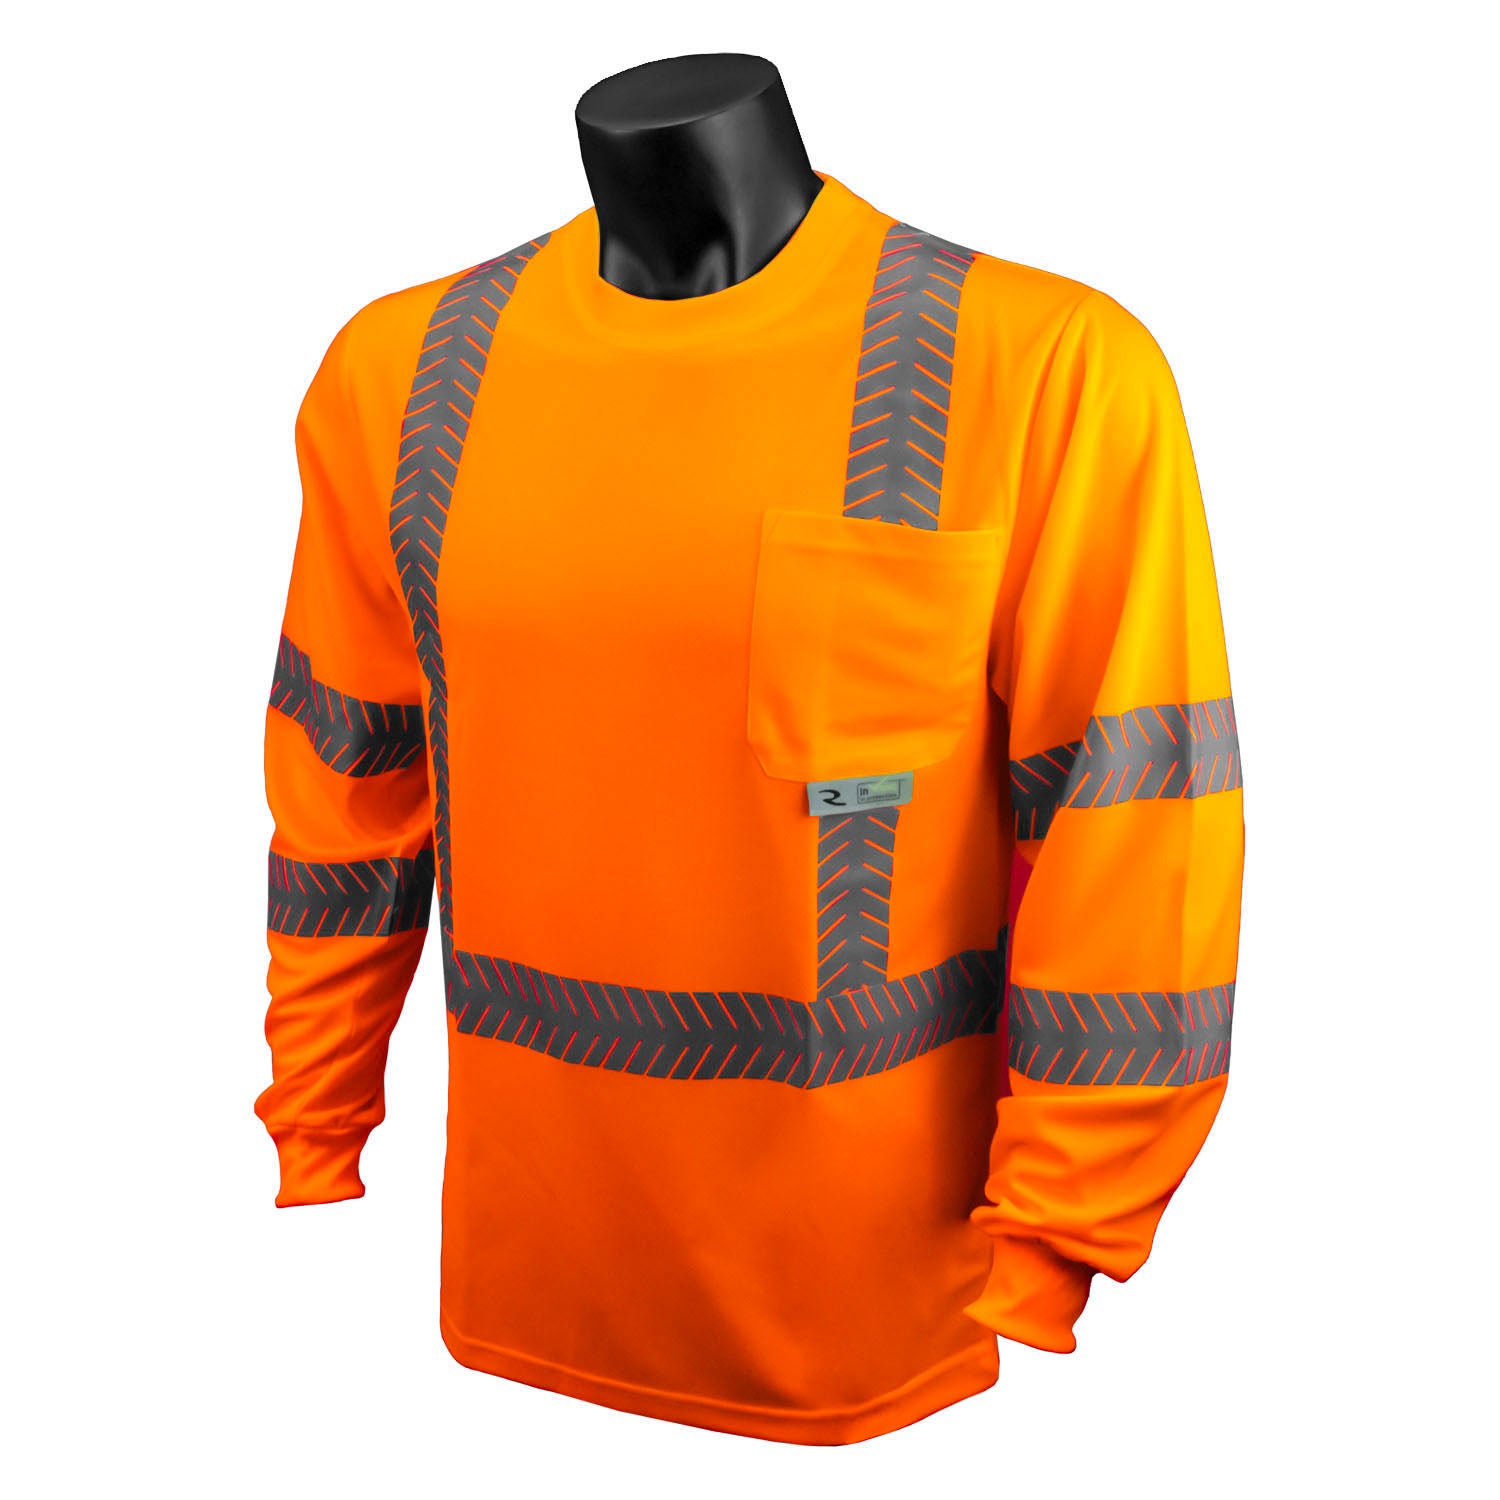 Radians ST24-3 Class 3 High Visibility Long Sleeve Safety T-Shirt with Rad-Shade® UV Protection-eSafety Supplies, Inc